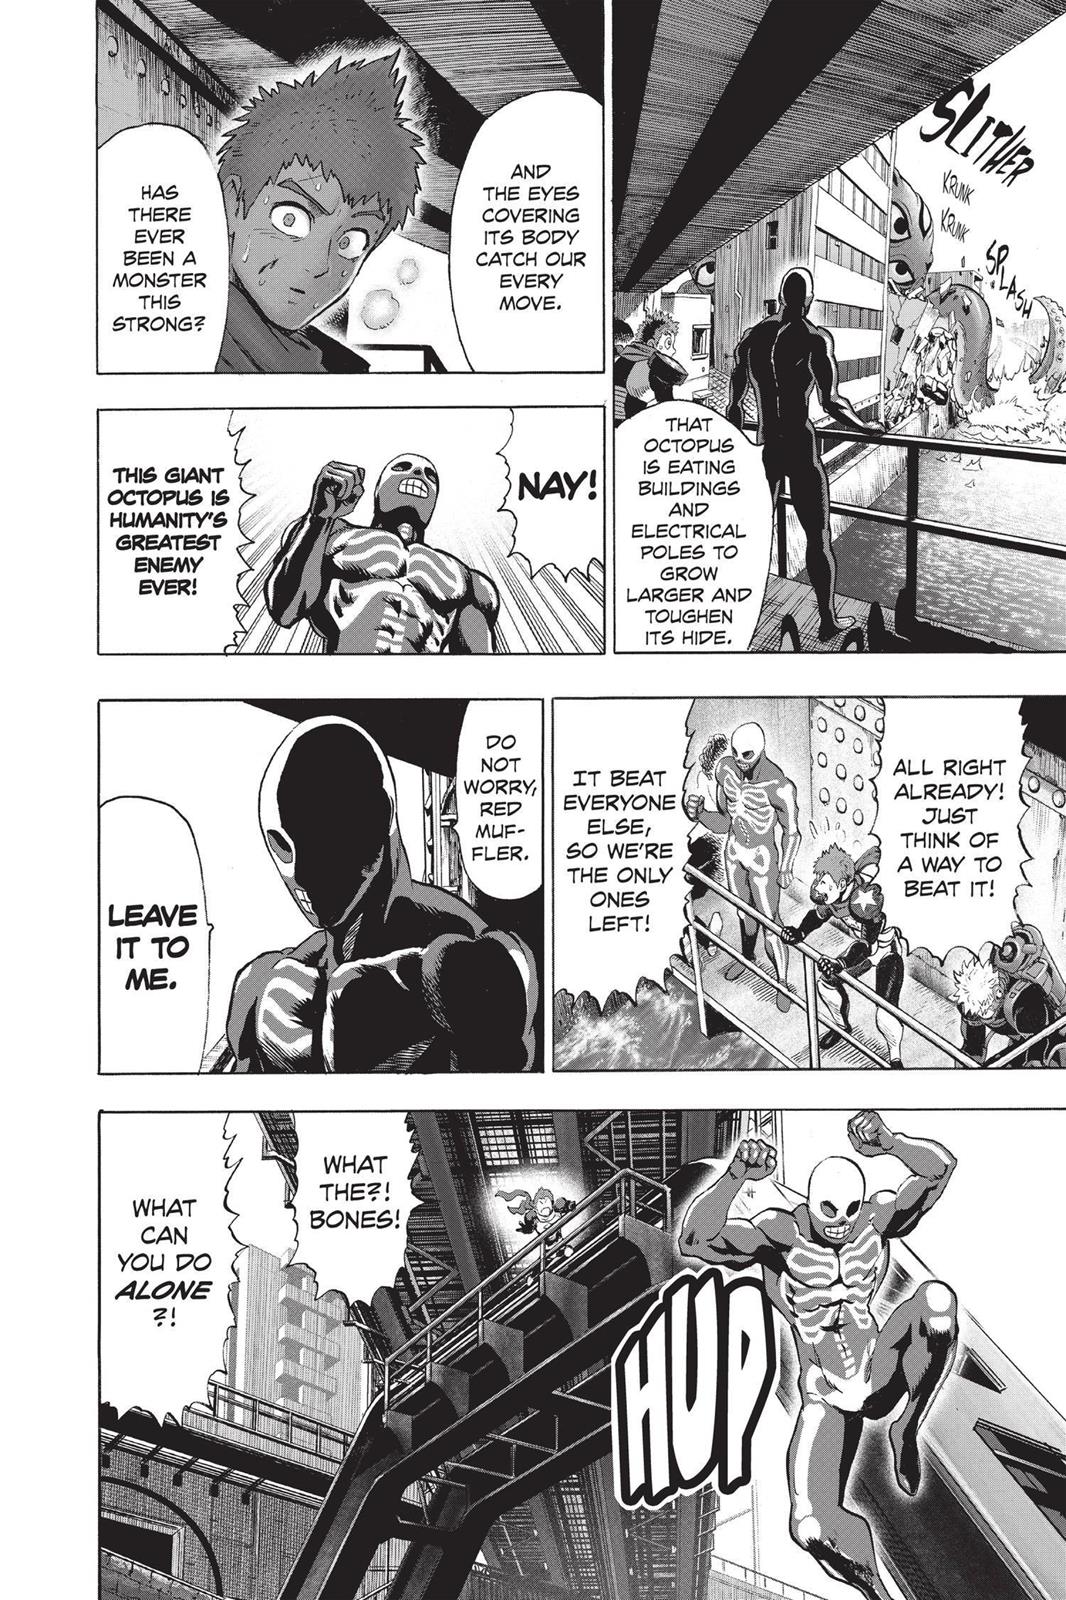 One-Punch Man, Punch 68 image 13